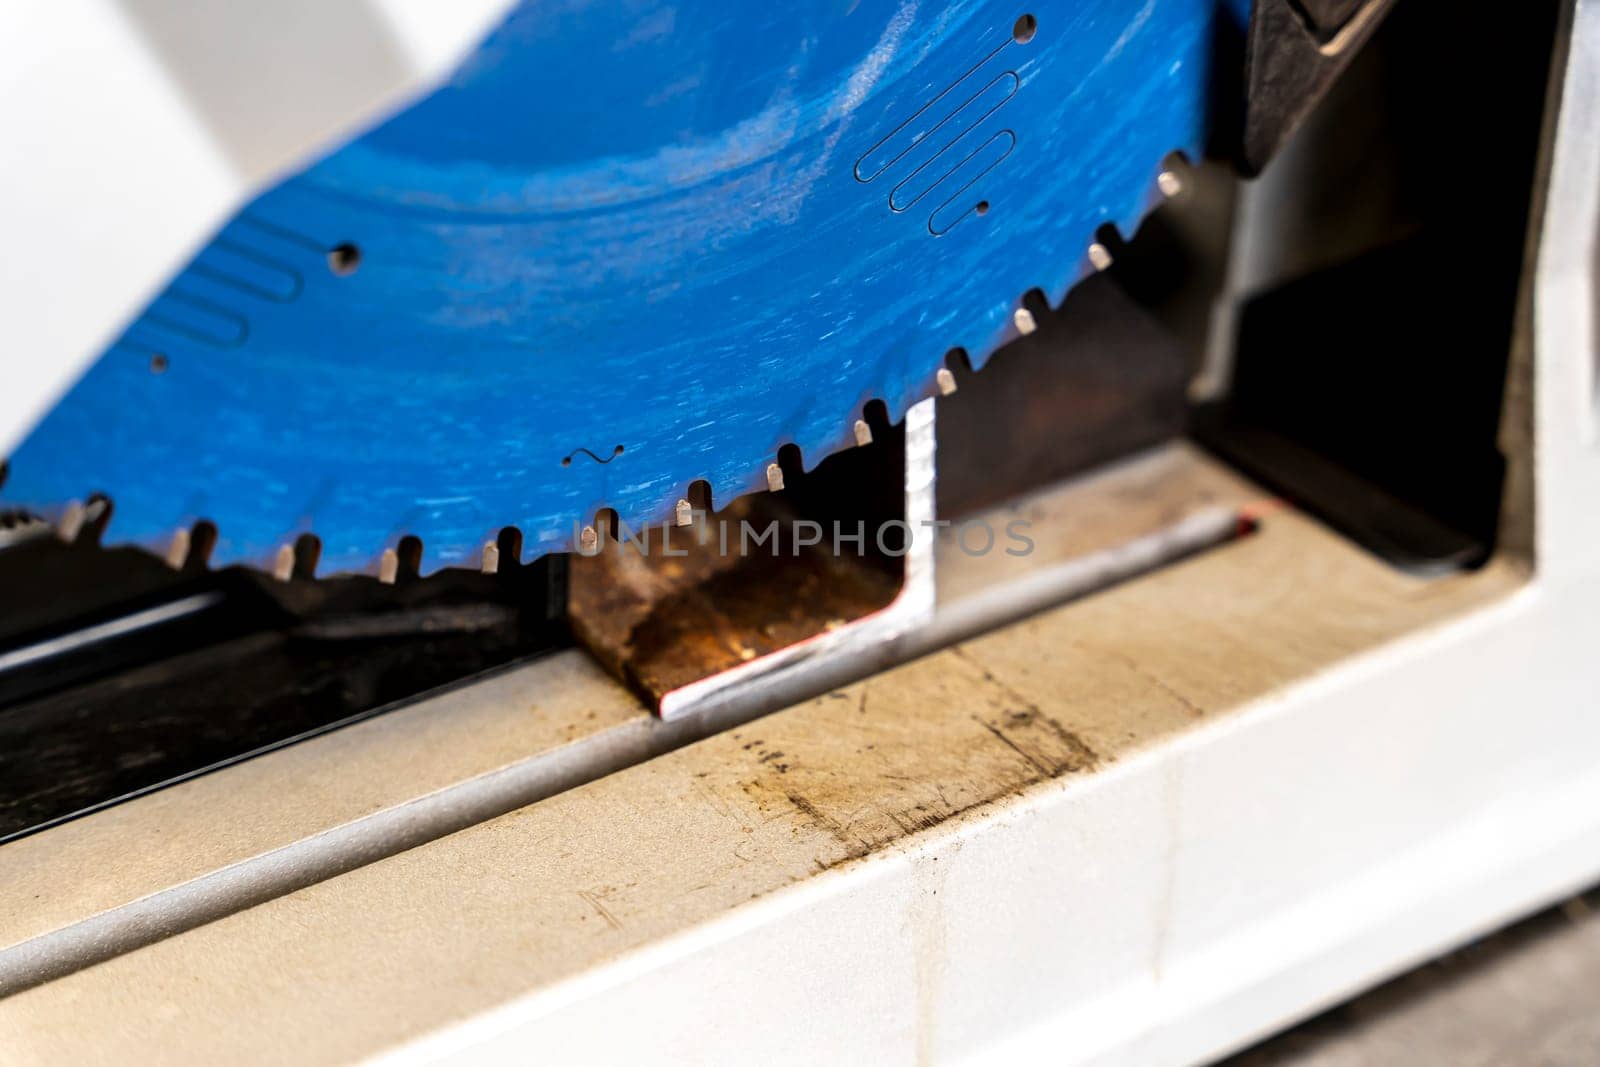 metal saw with tool cutting disc makes a cut. work in home workshop with electric steel cutter machine. Sparks fly from under cutting disc angle grinder. close up.